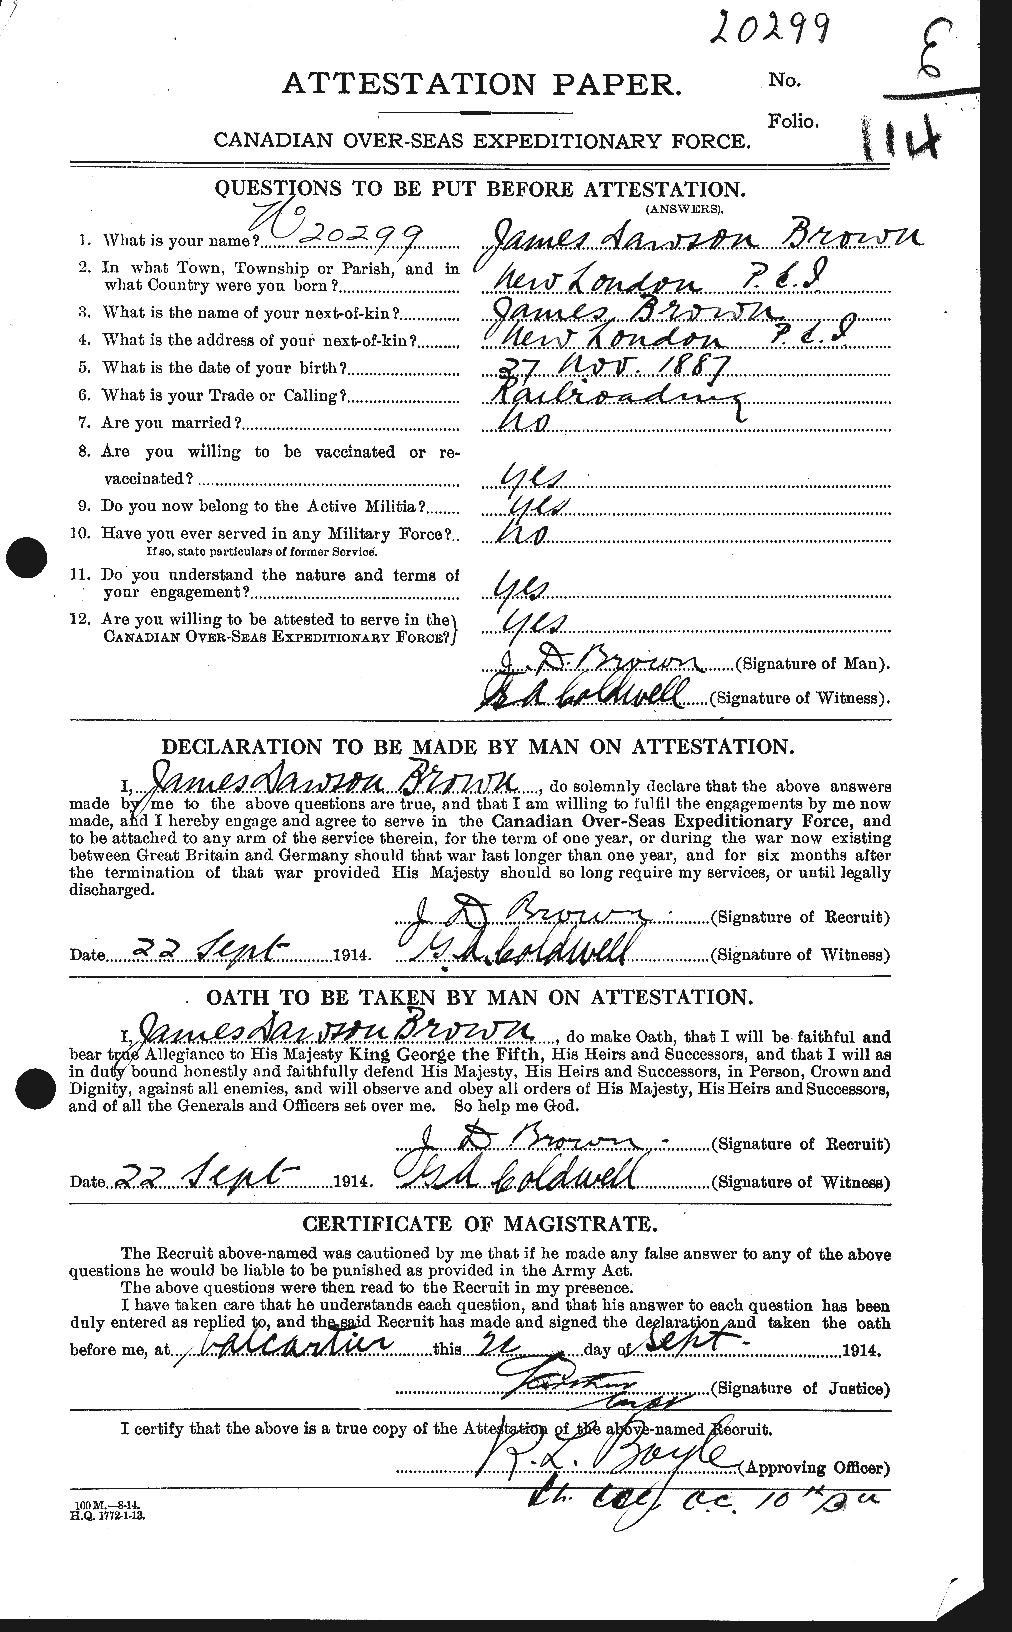 Personnel Records of the First World War - CEF 265809a